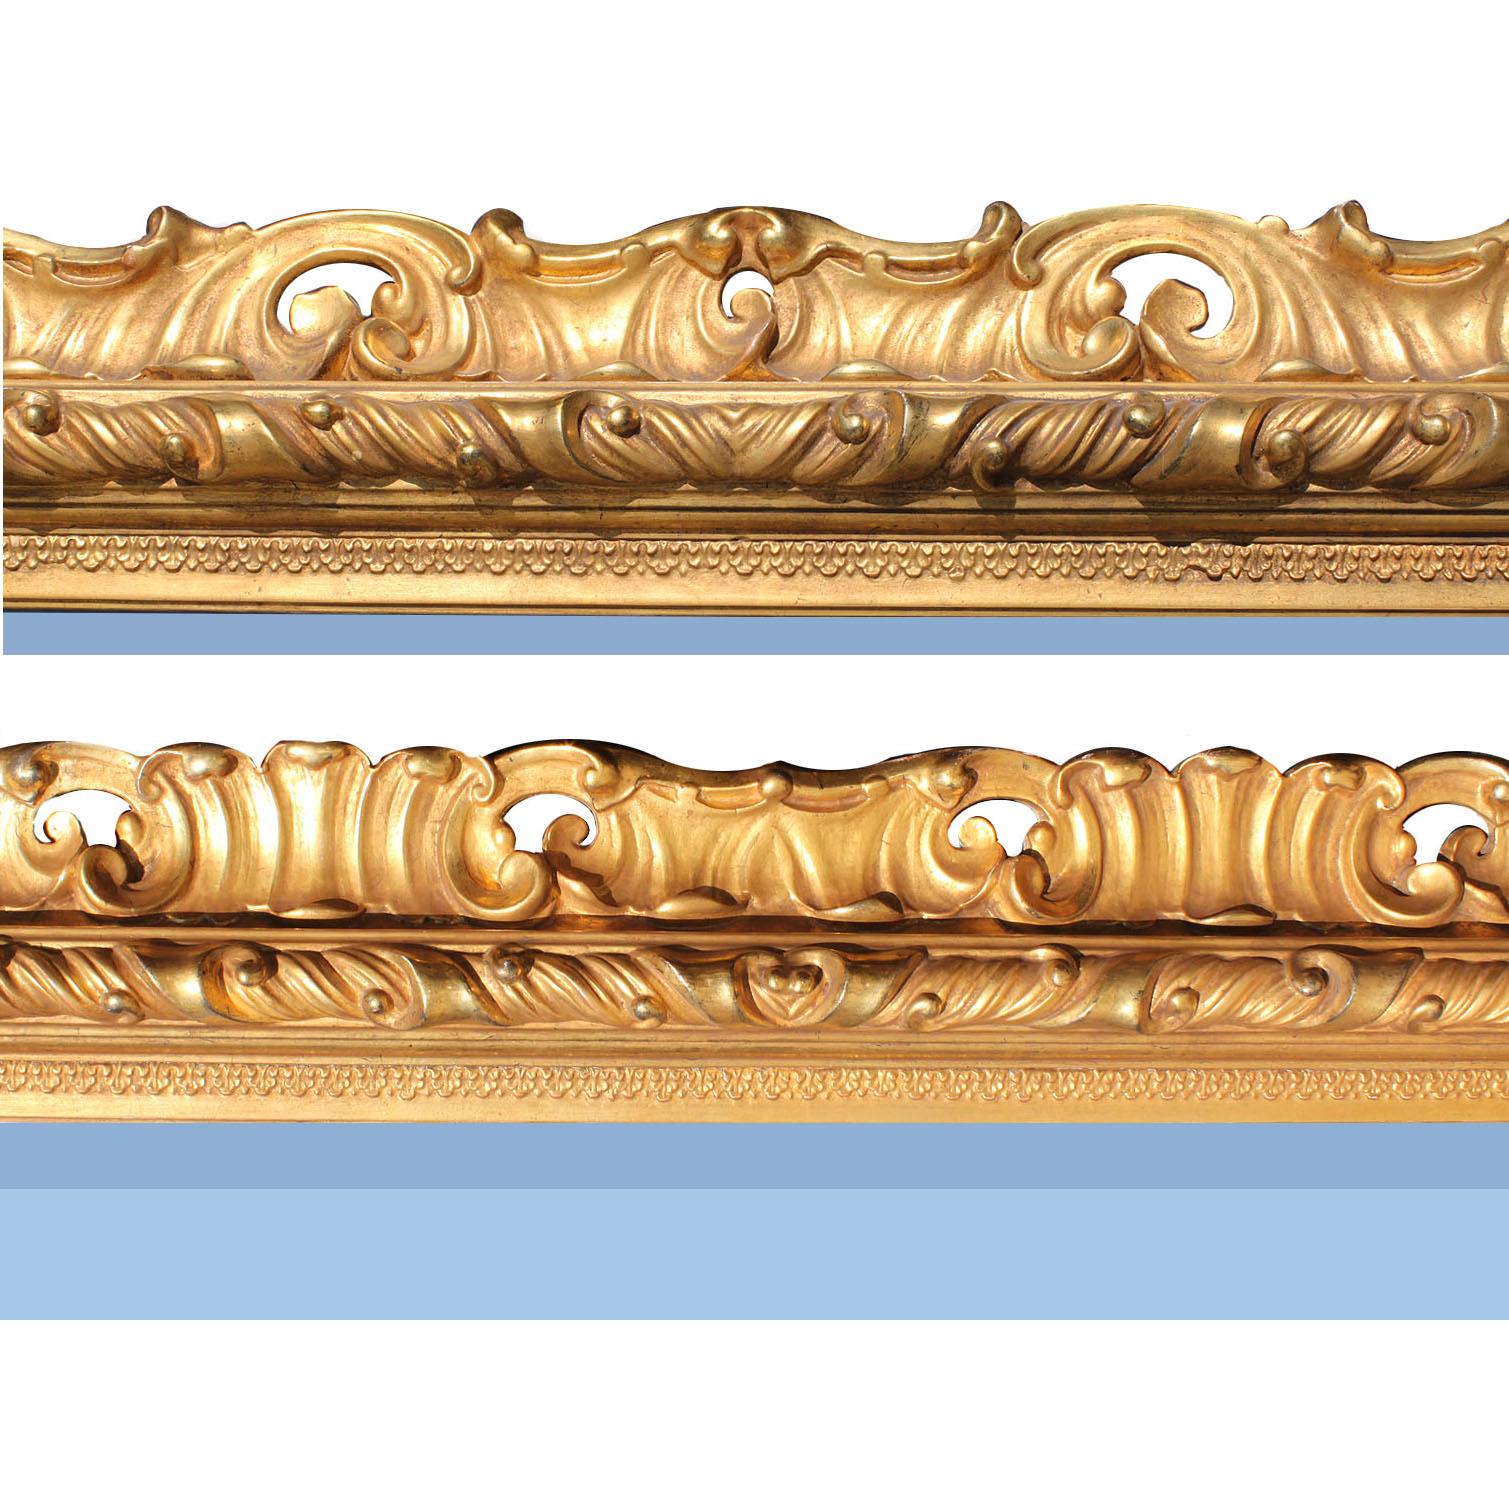 Hand-Carved Large Italian 19th Century Baroque Revival Style Giltwood Carved Mirror Frame For Sale